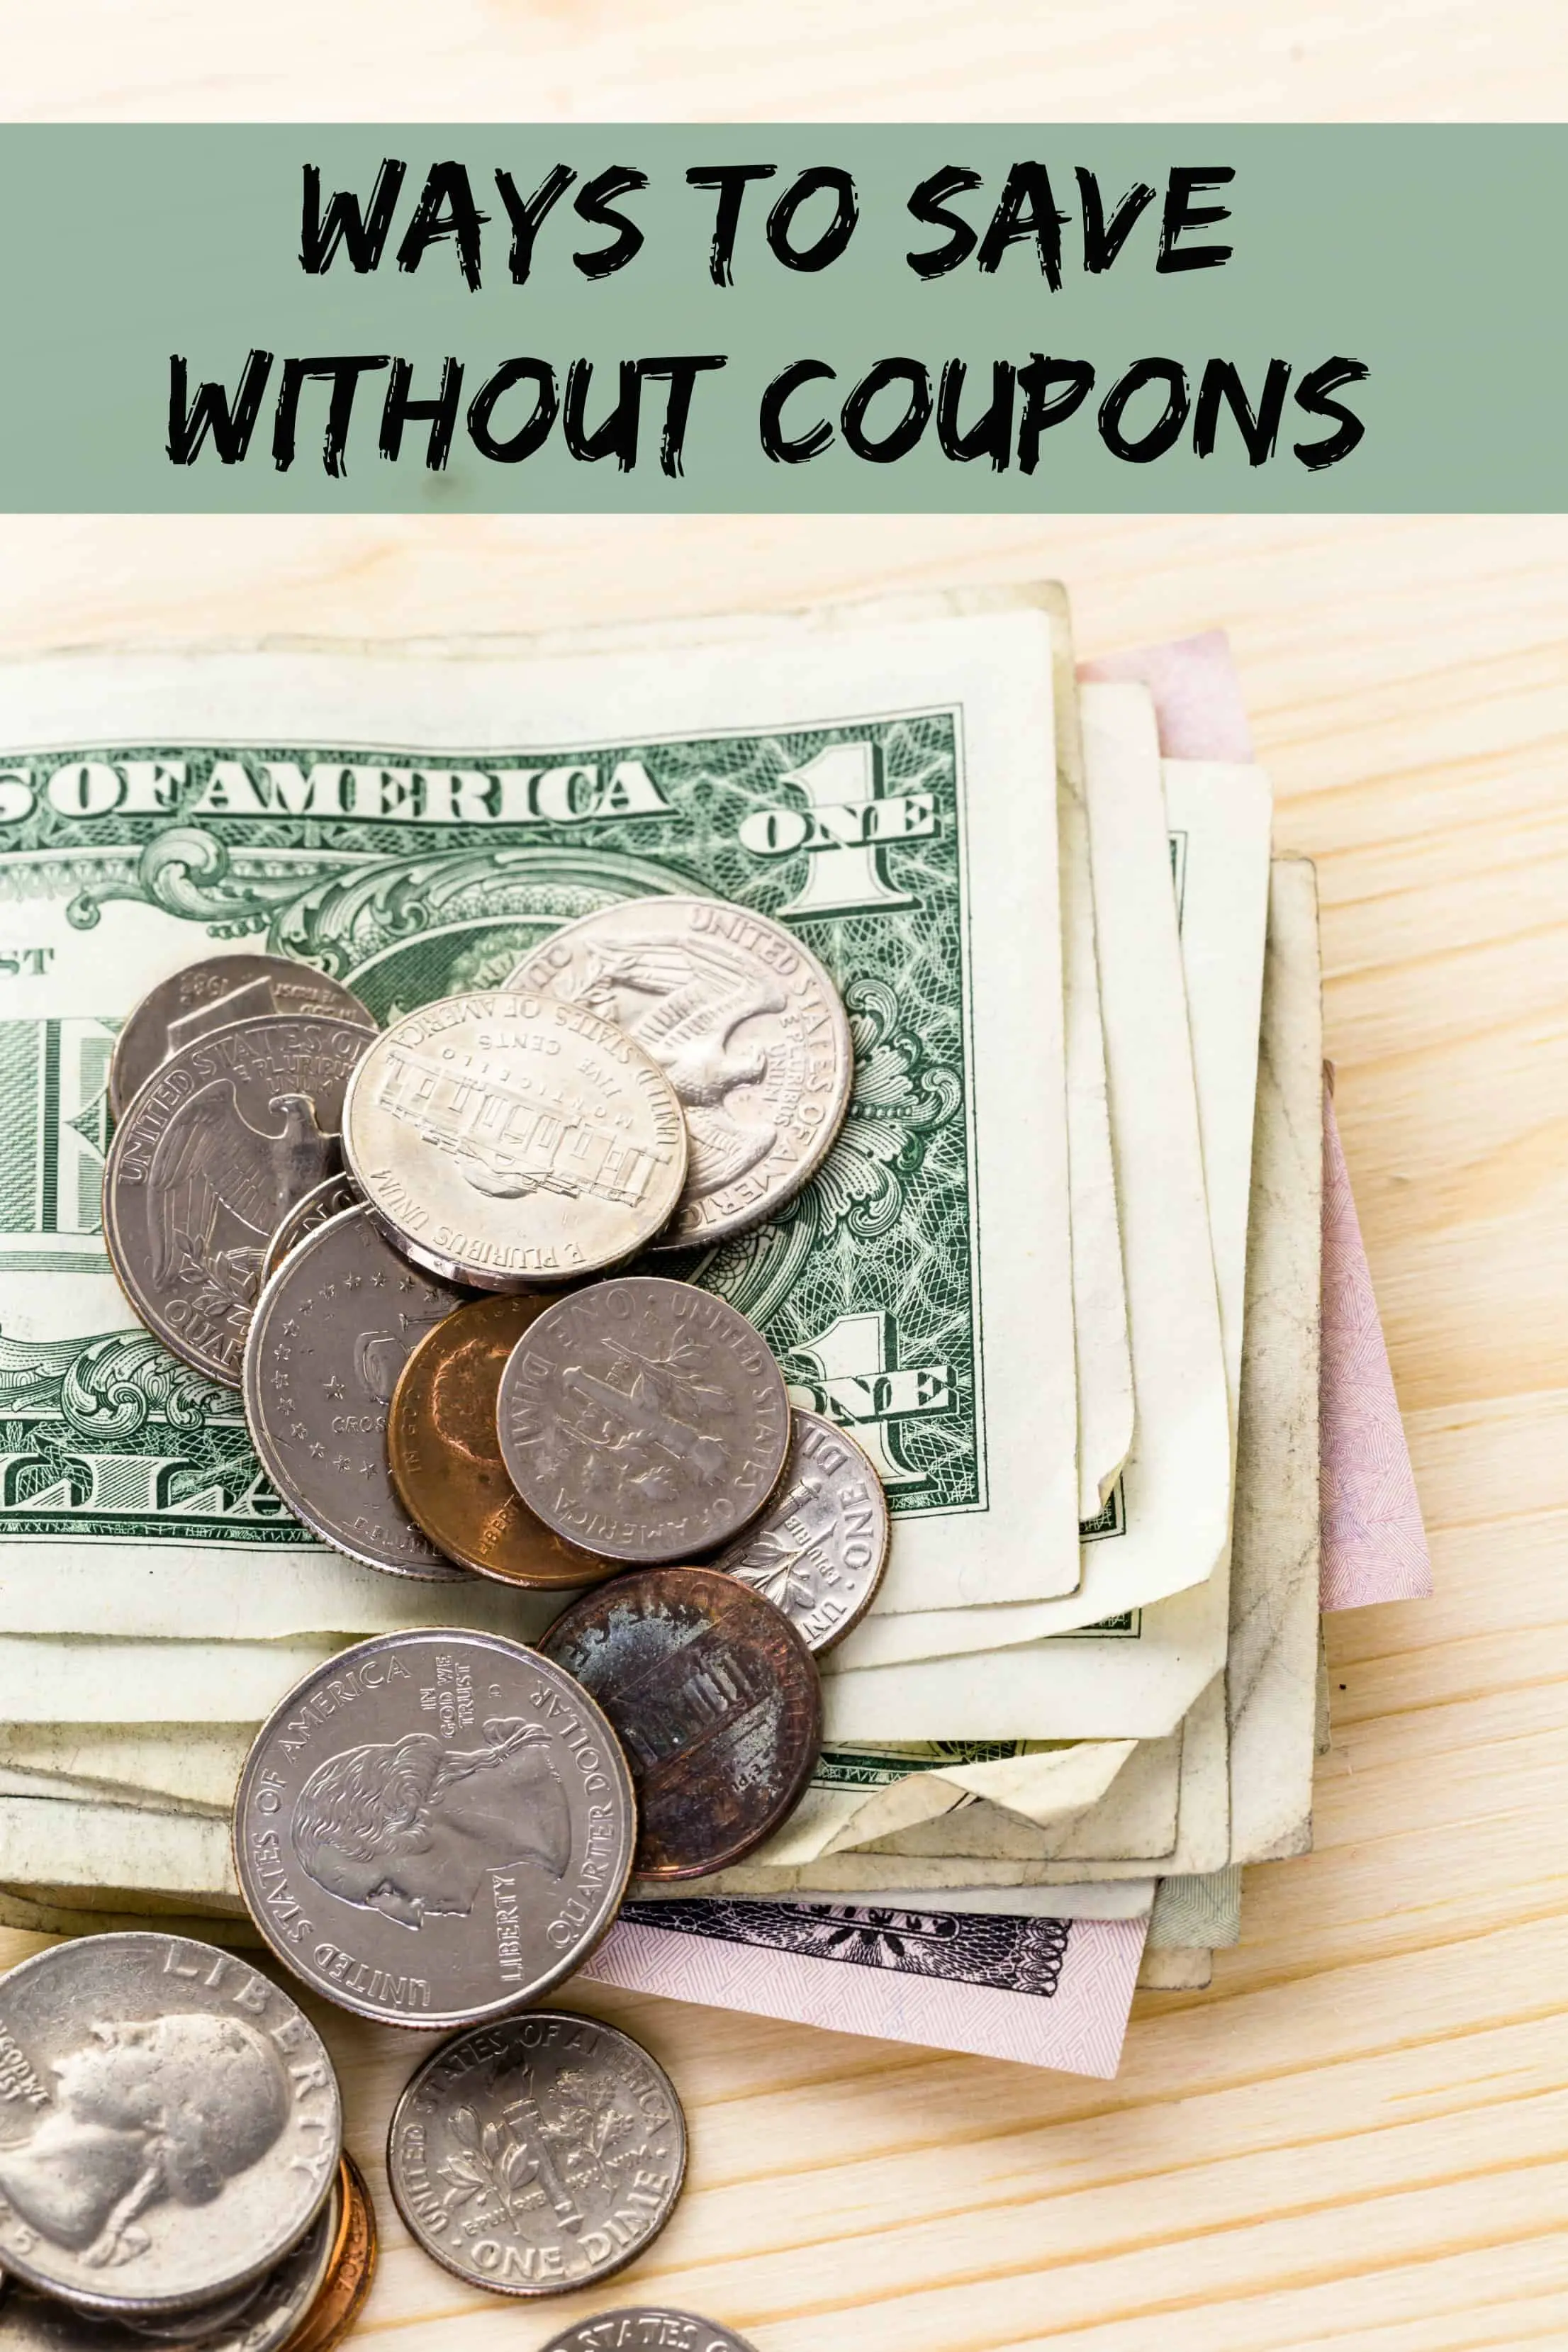 Ways To Save Without Coupons - tips for saving money without having to use coupons!